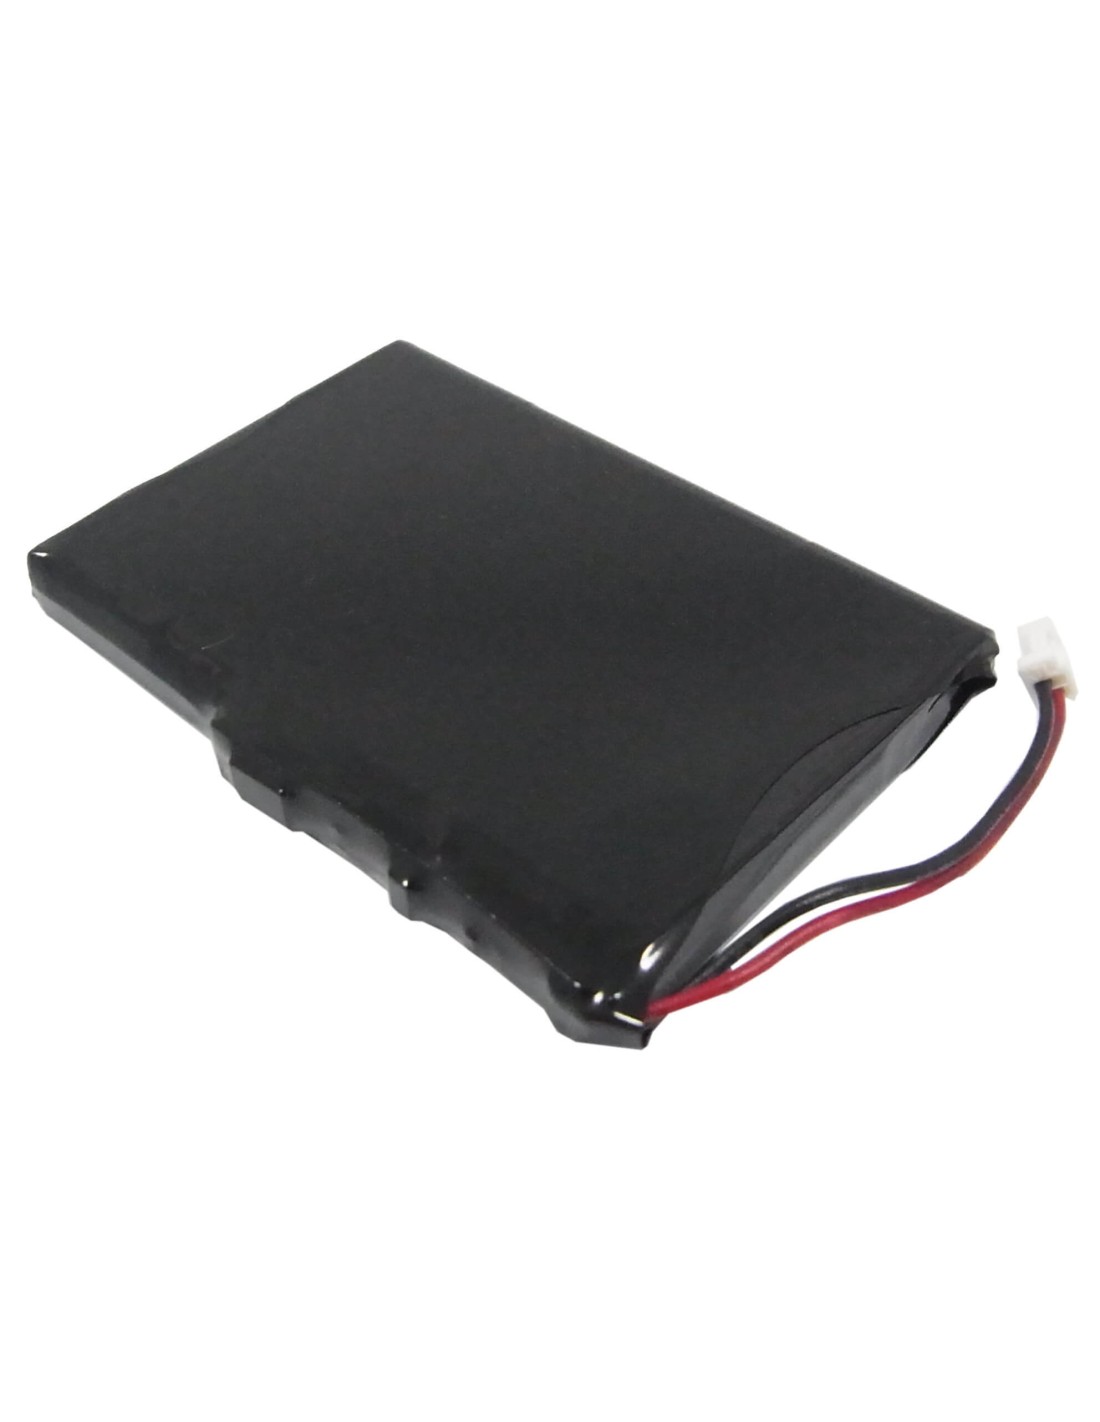 Battery for Garmin Ique 3200, Ique 3600, Ique 3600a 3.7V, 1000mAh - 3.70Wh